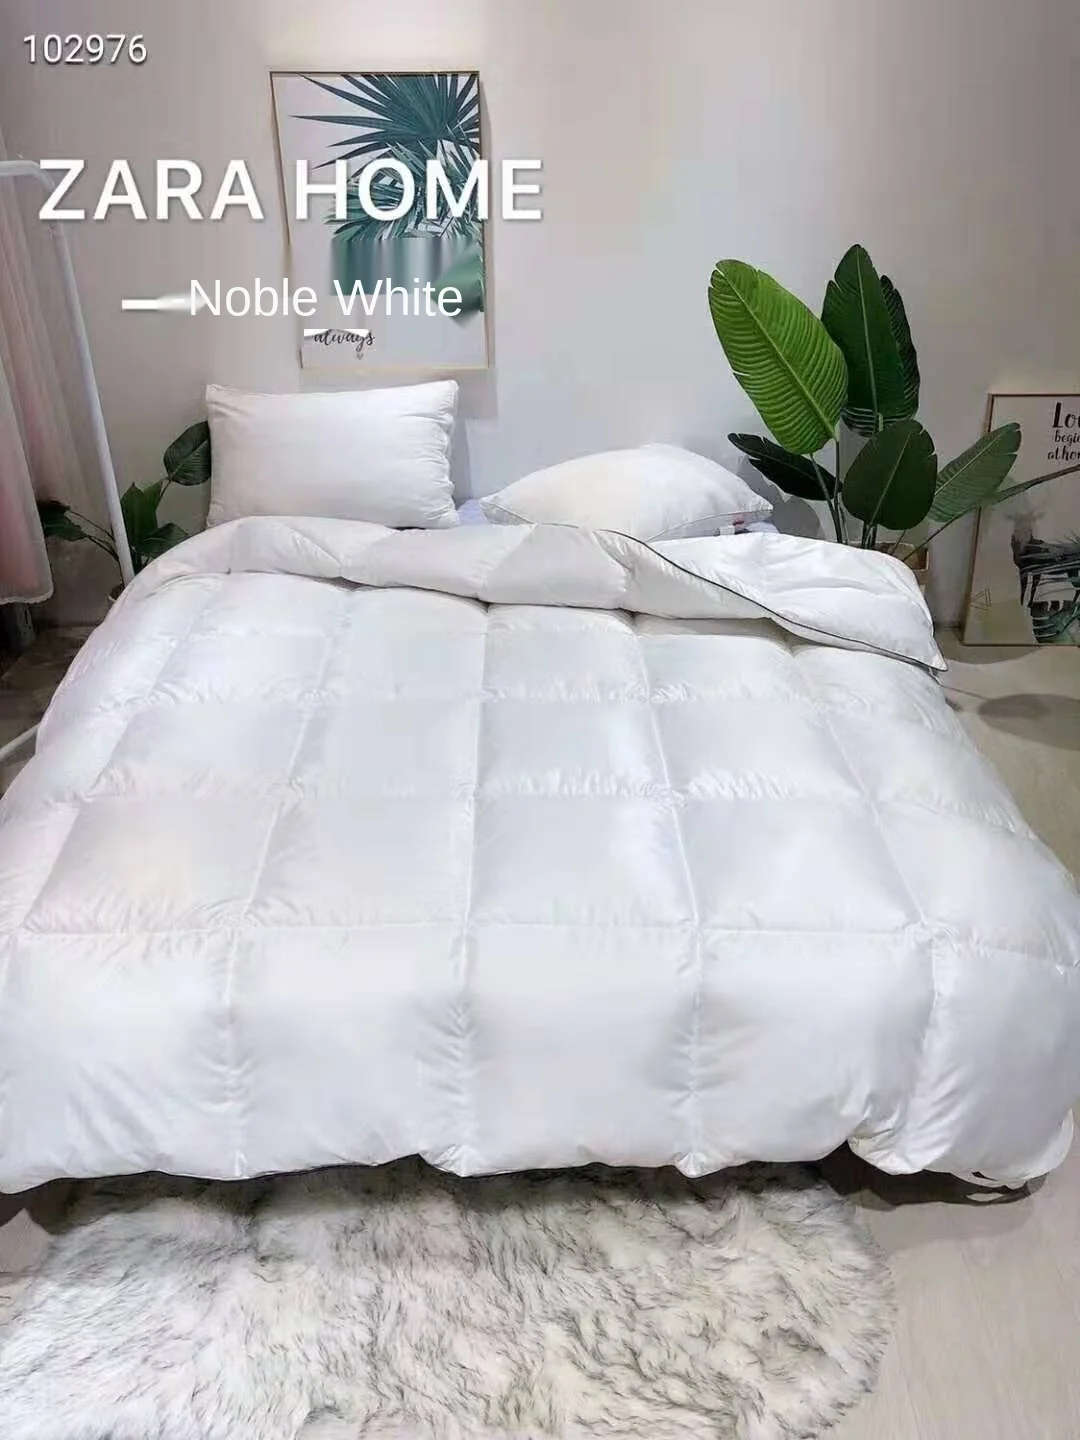 ZARA HOME Goose/duck down quilt blanket duvet for winter cotton cover  thicken comforter King Queen Twin size fast free ship|Comforters & Duvets|  - AliExpress